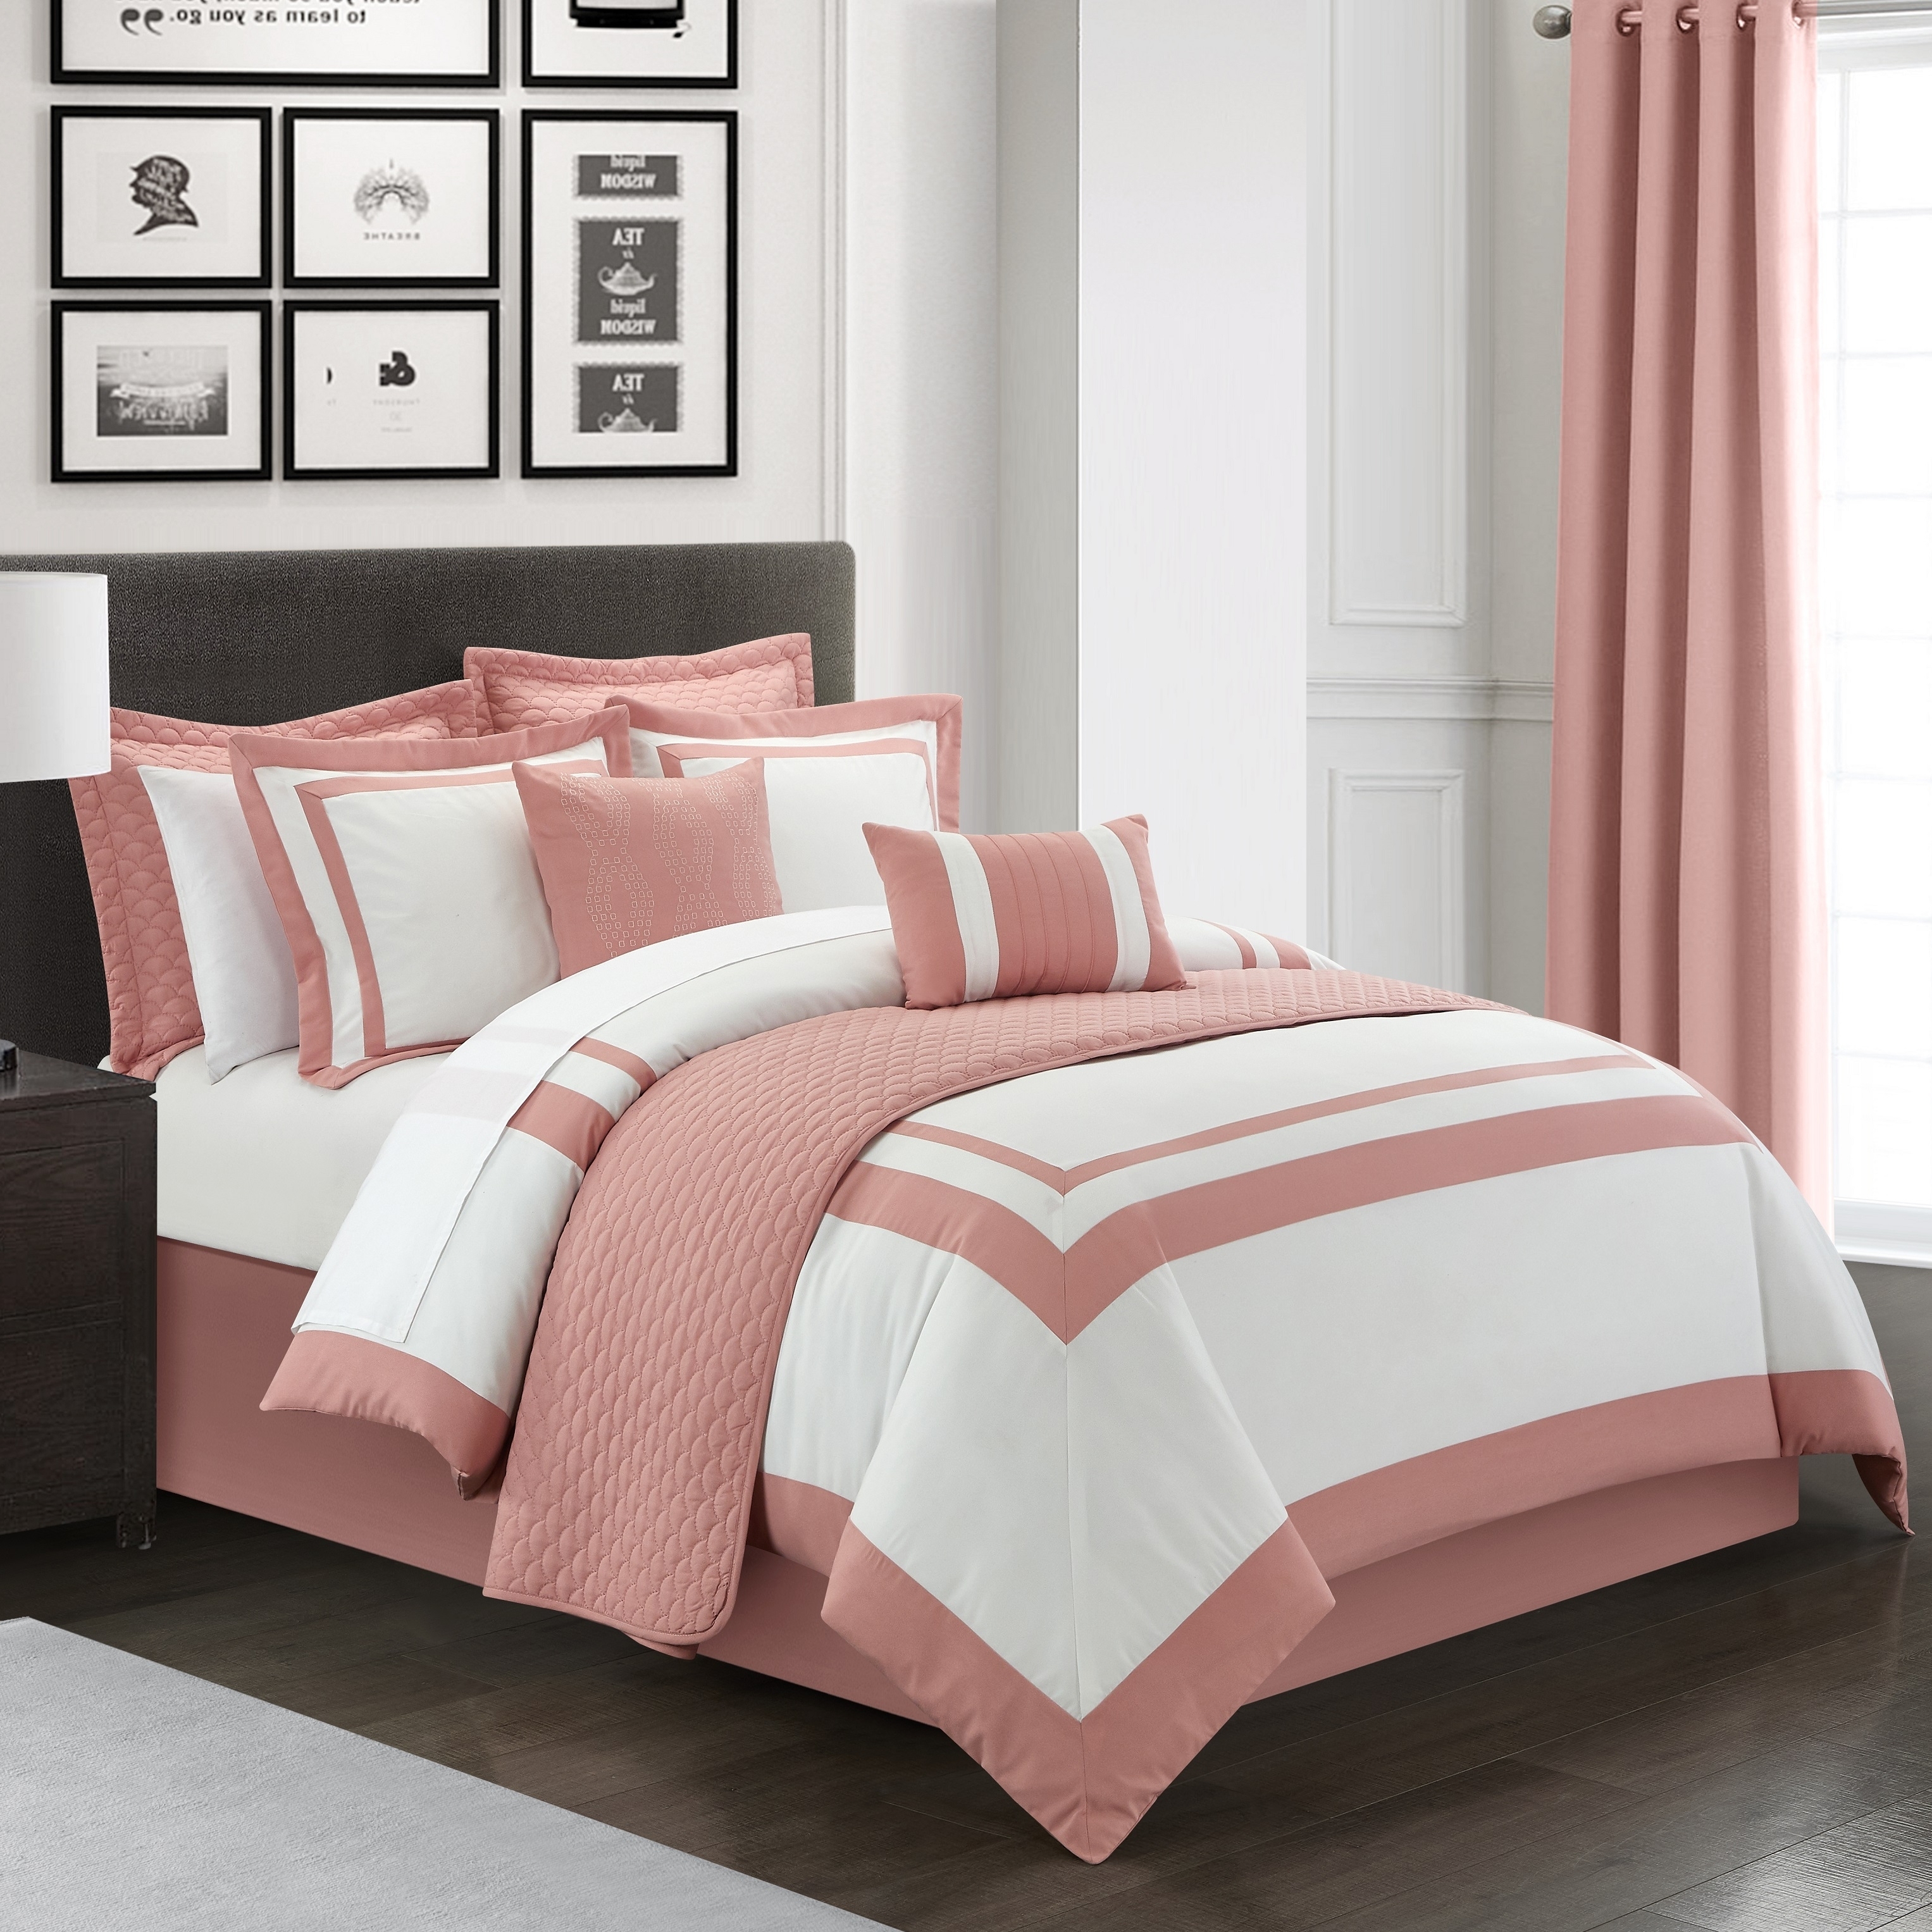 Hortense 8 Or 6 Piece Comforter And Quilt Set Hotel Collection - Rose, Twin - 6 Piece